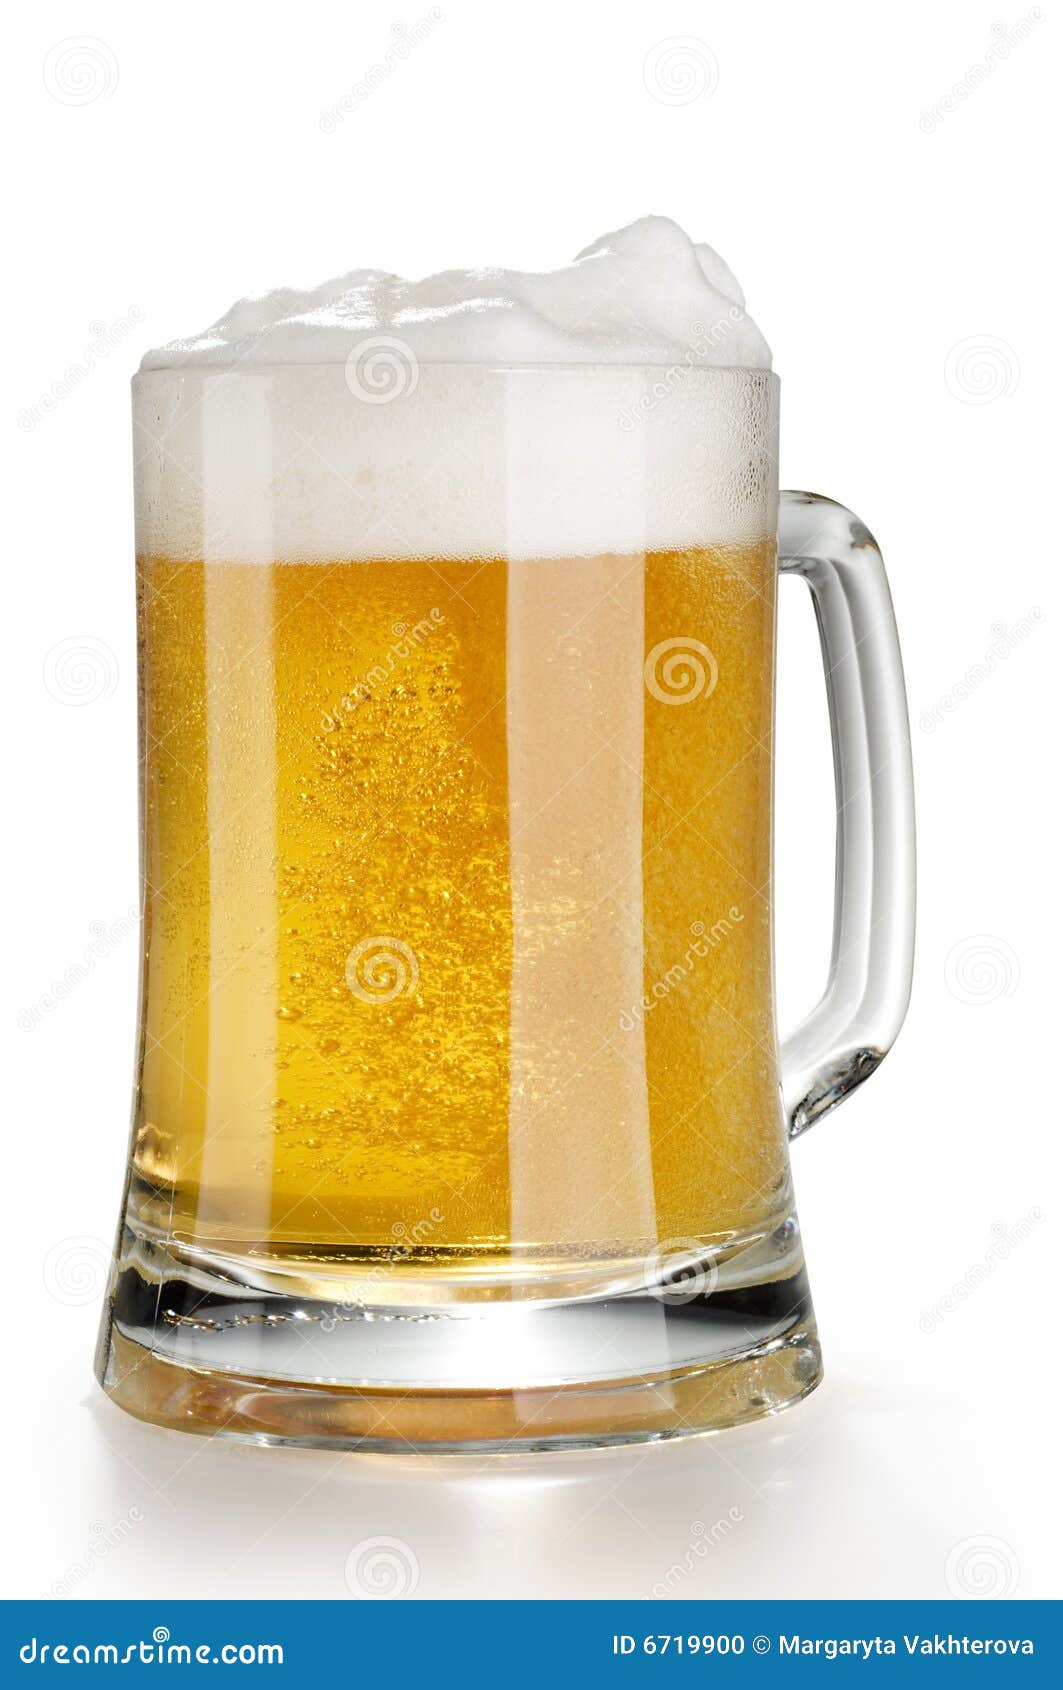 alcohol light beer mug with froth 